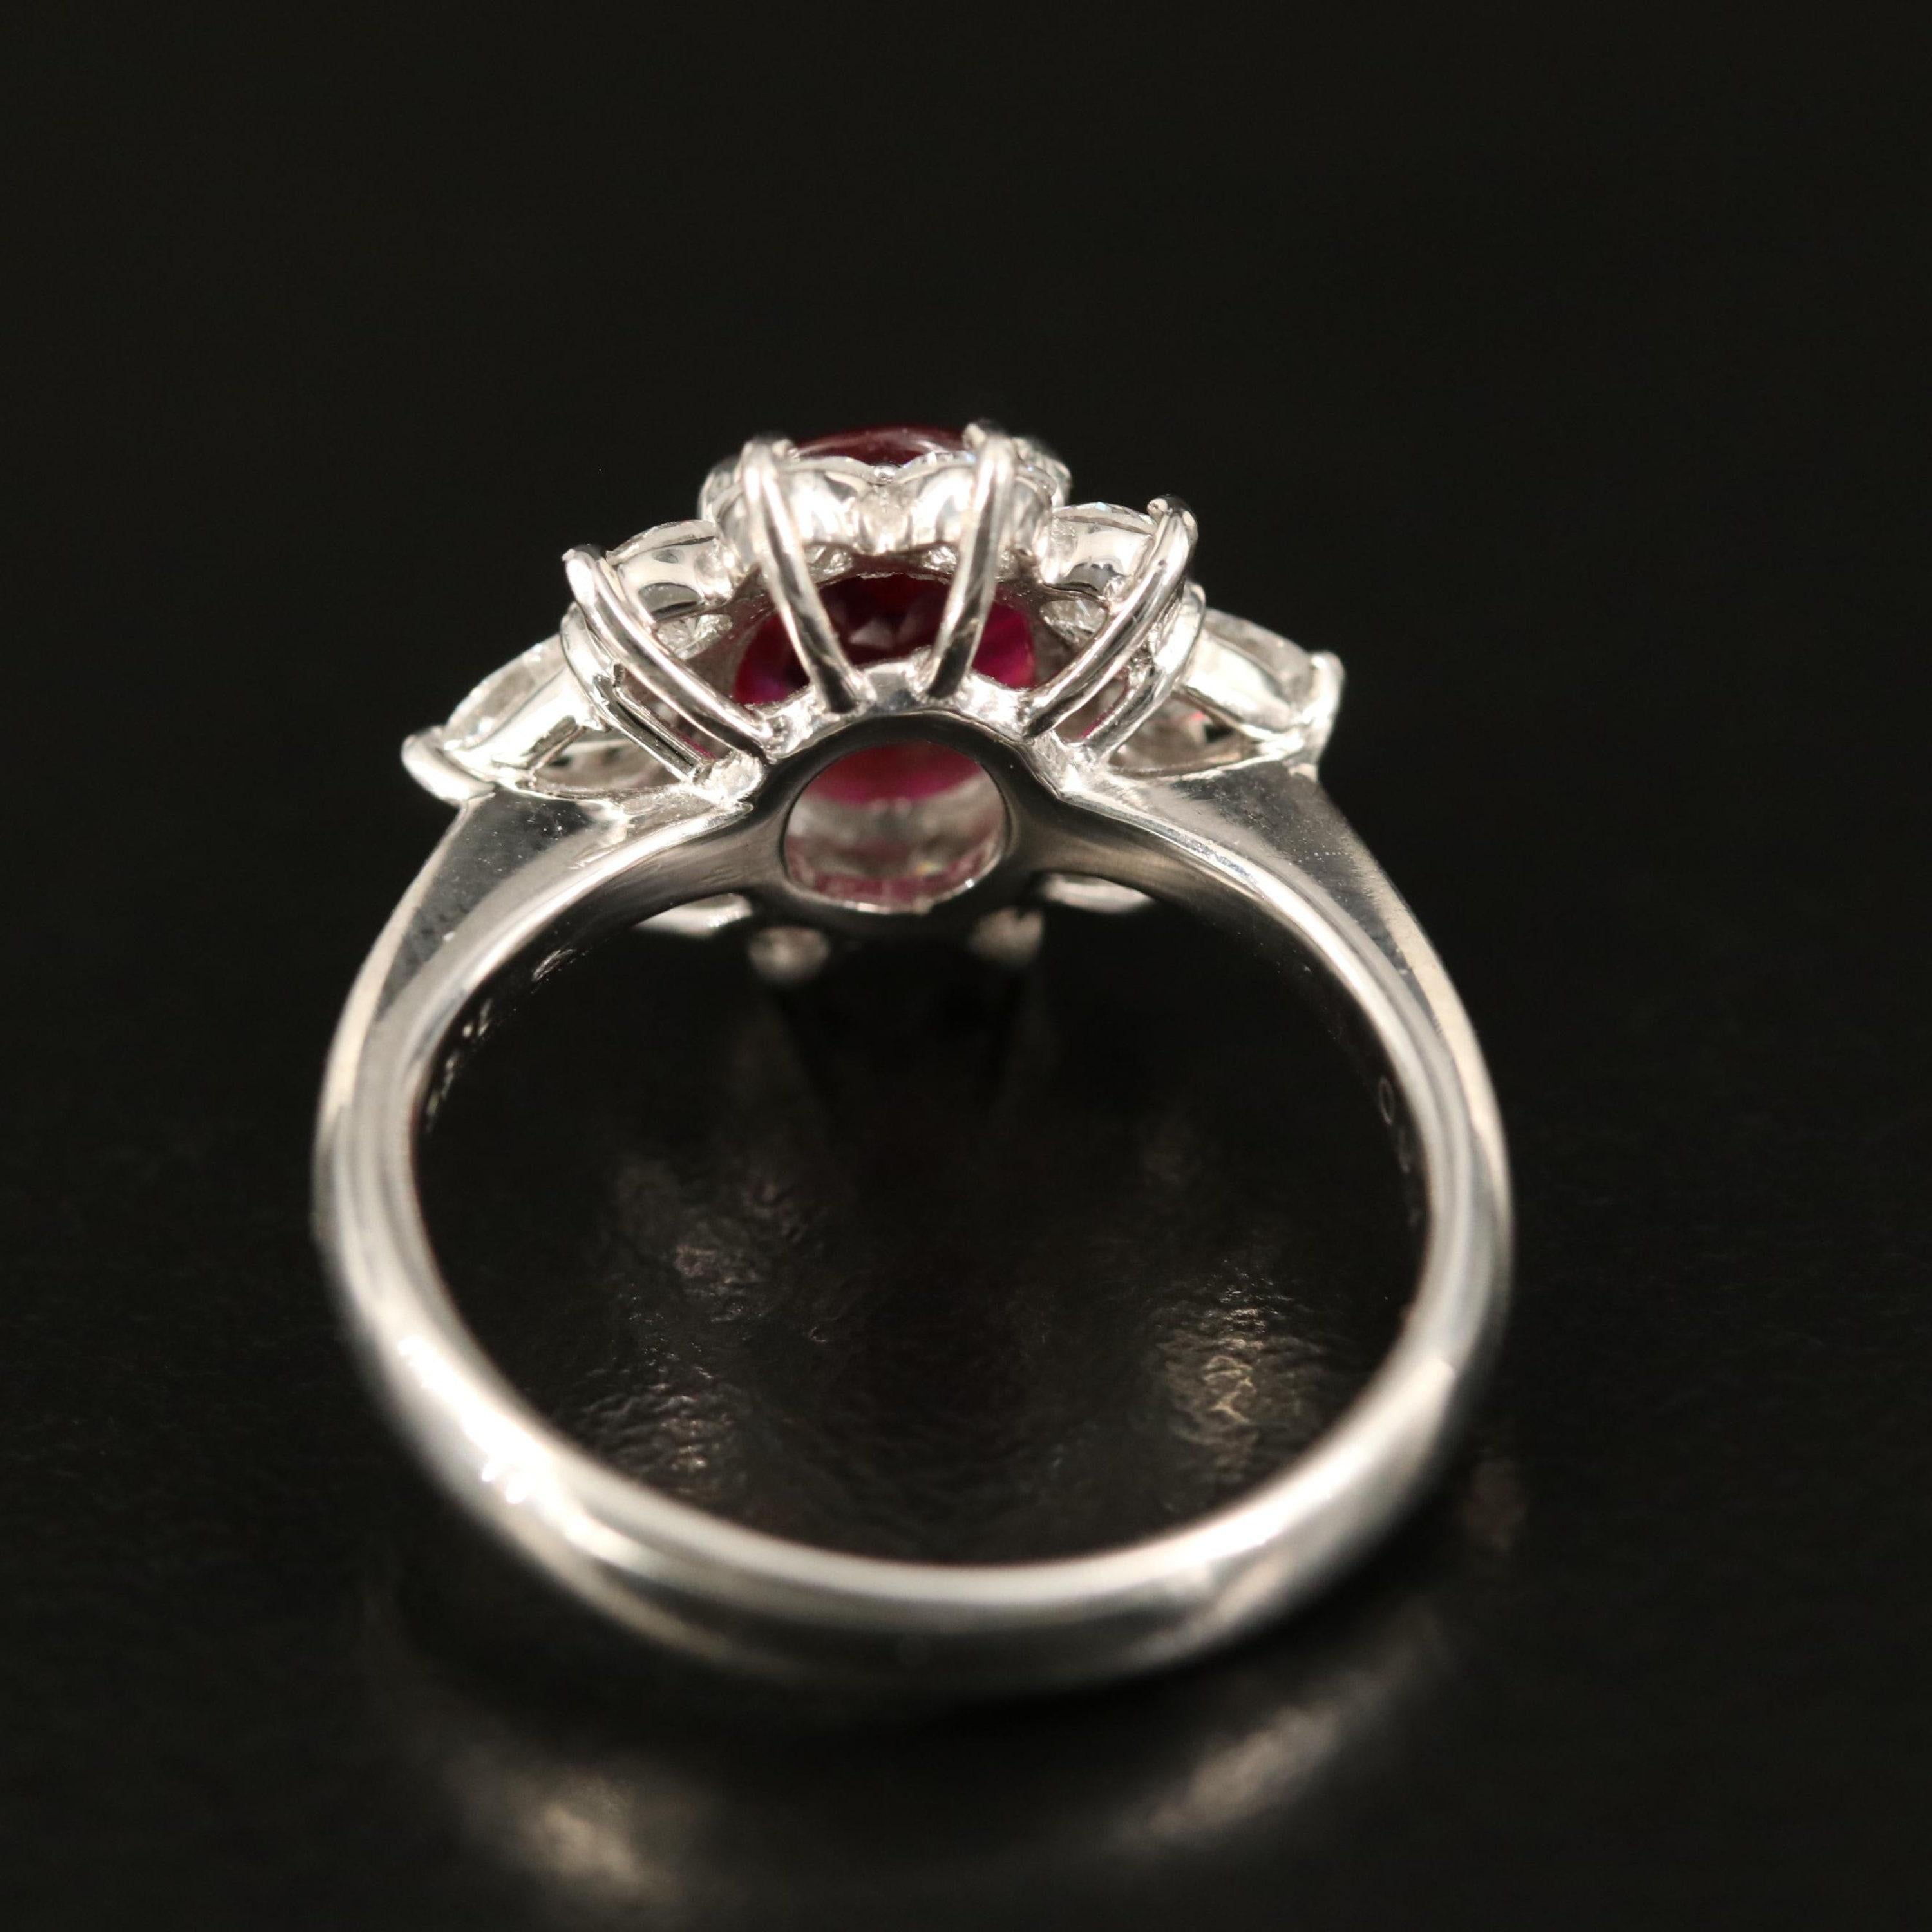 For Sale:  1.6 Carat Antique Floral Ruby Diamond Engagement Ring Gold Ruby Wedding Ring 2